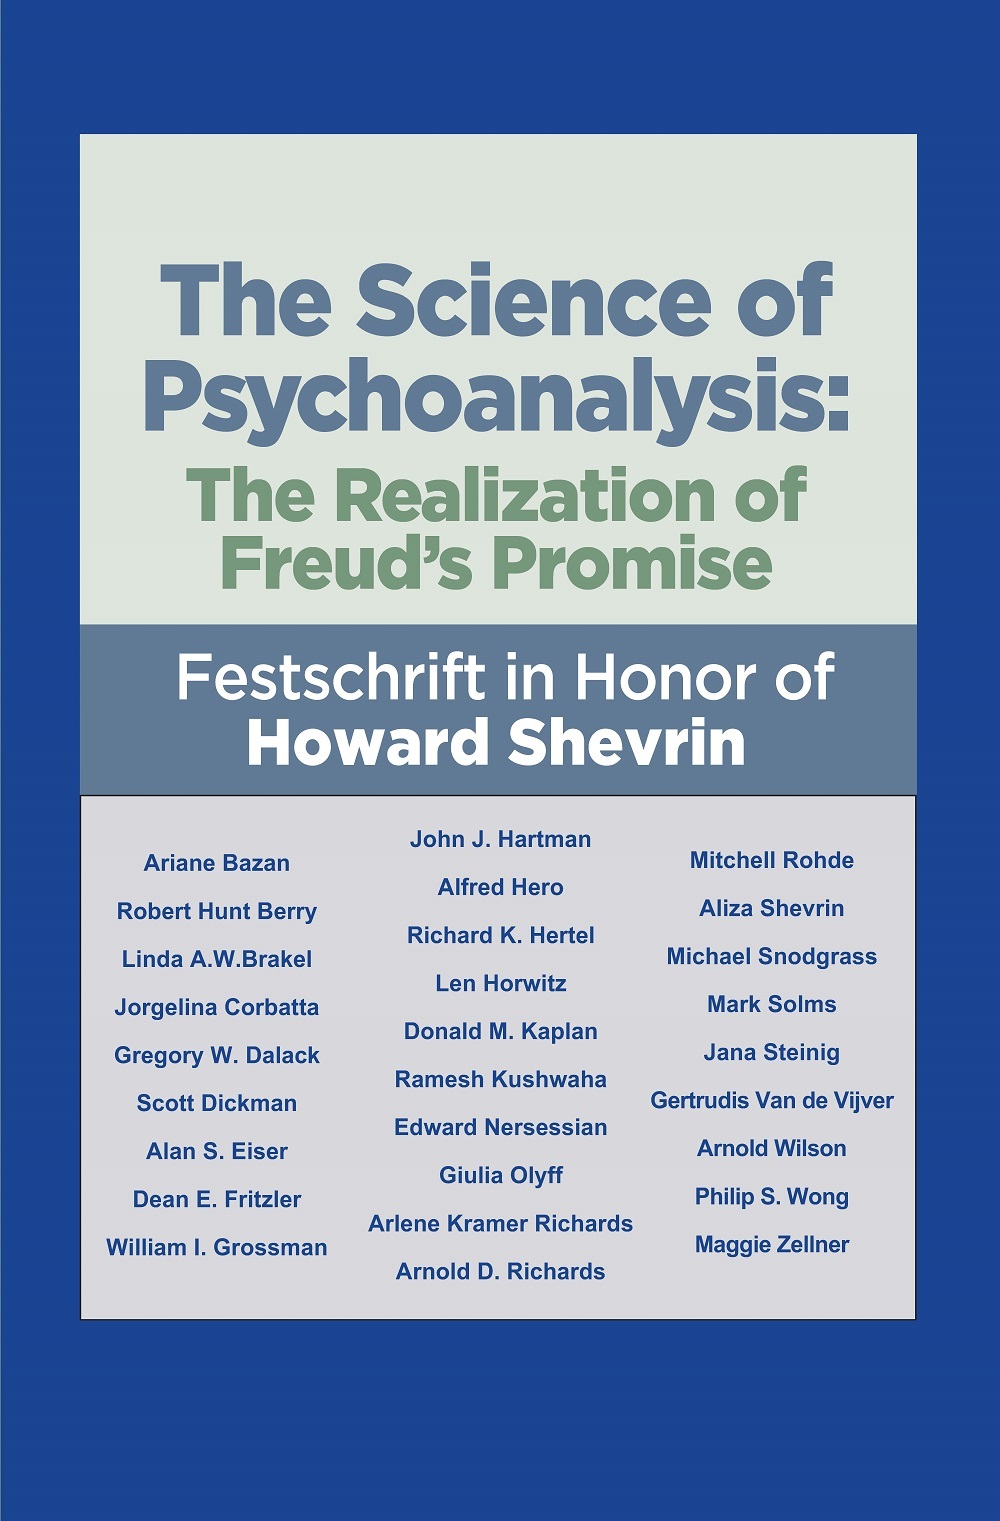 The Science of Psychoanalysis: Festschrift in Honor or Howard Shevrin